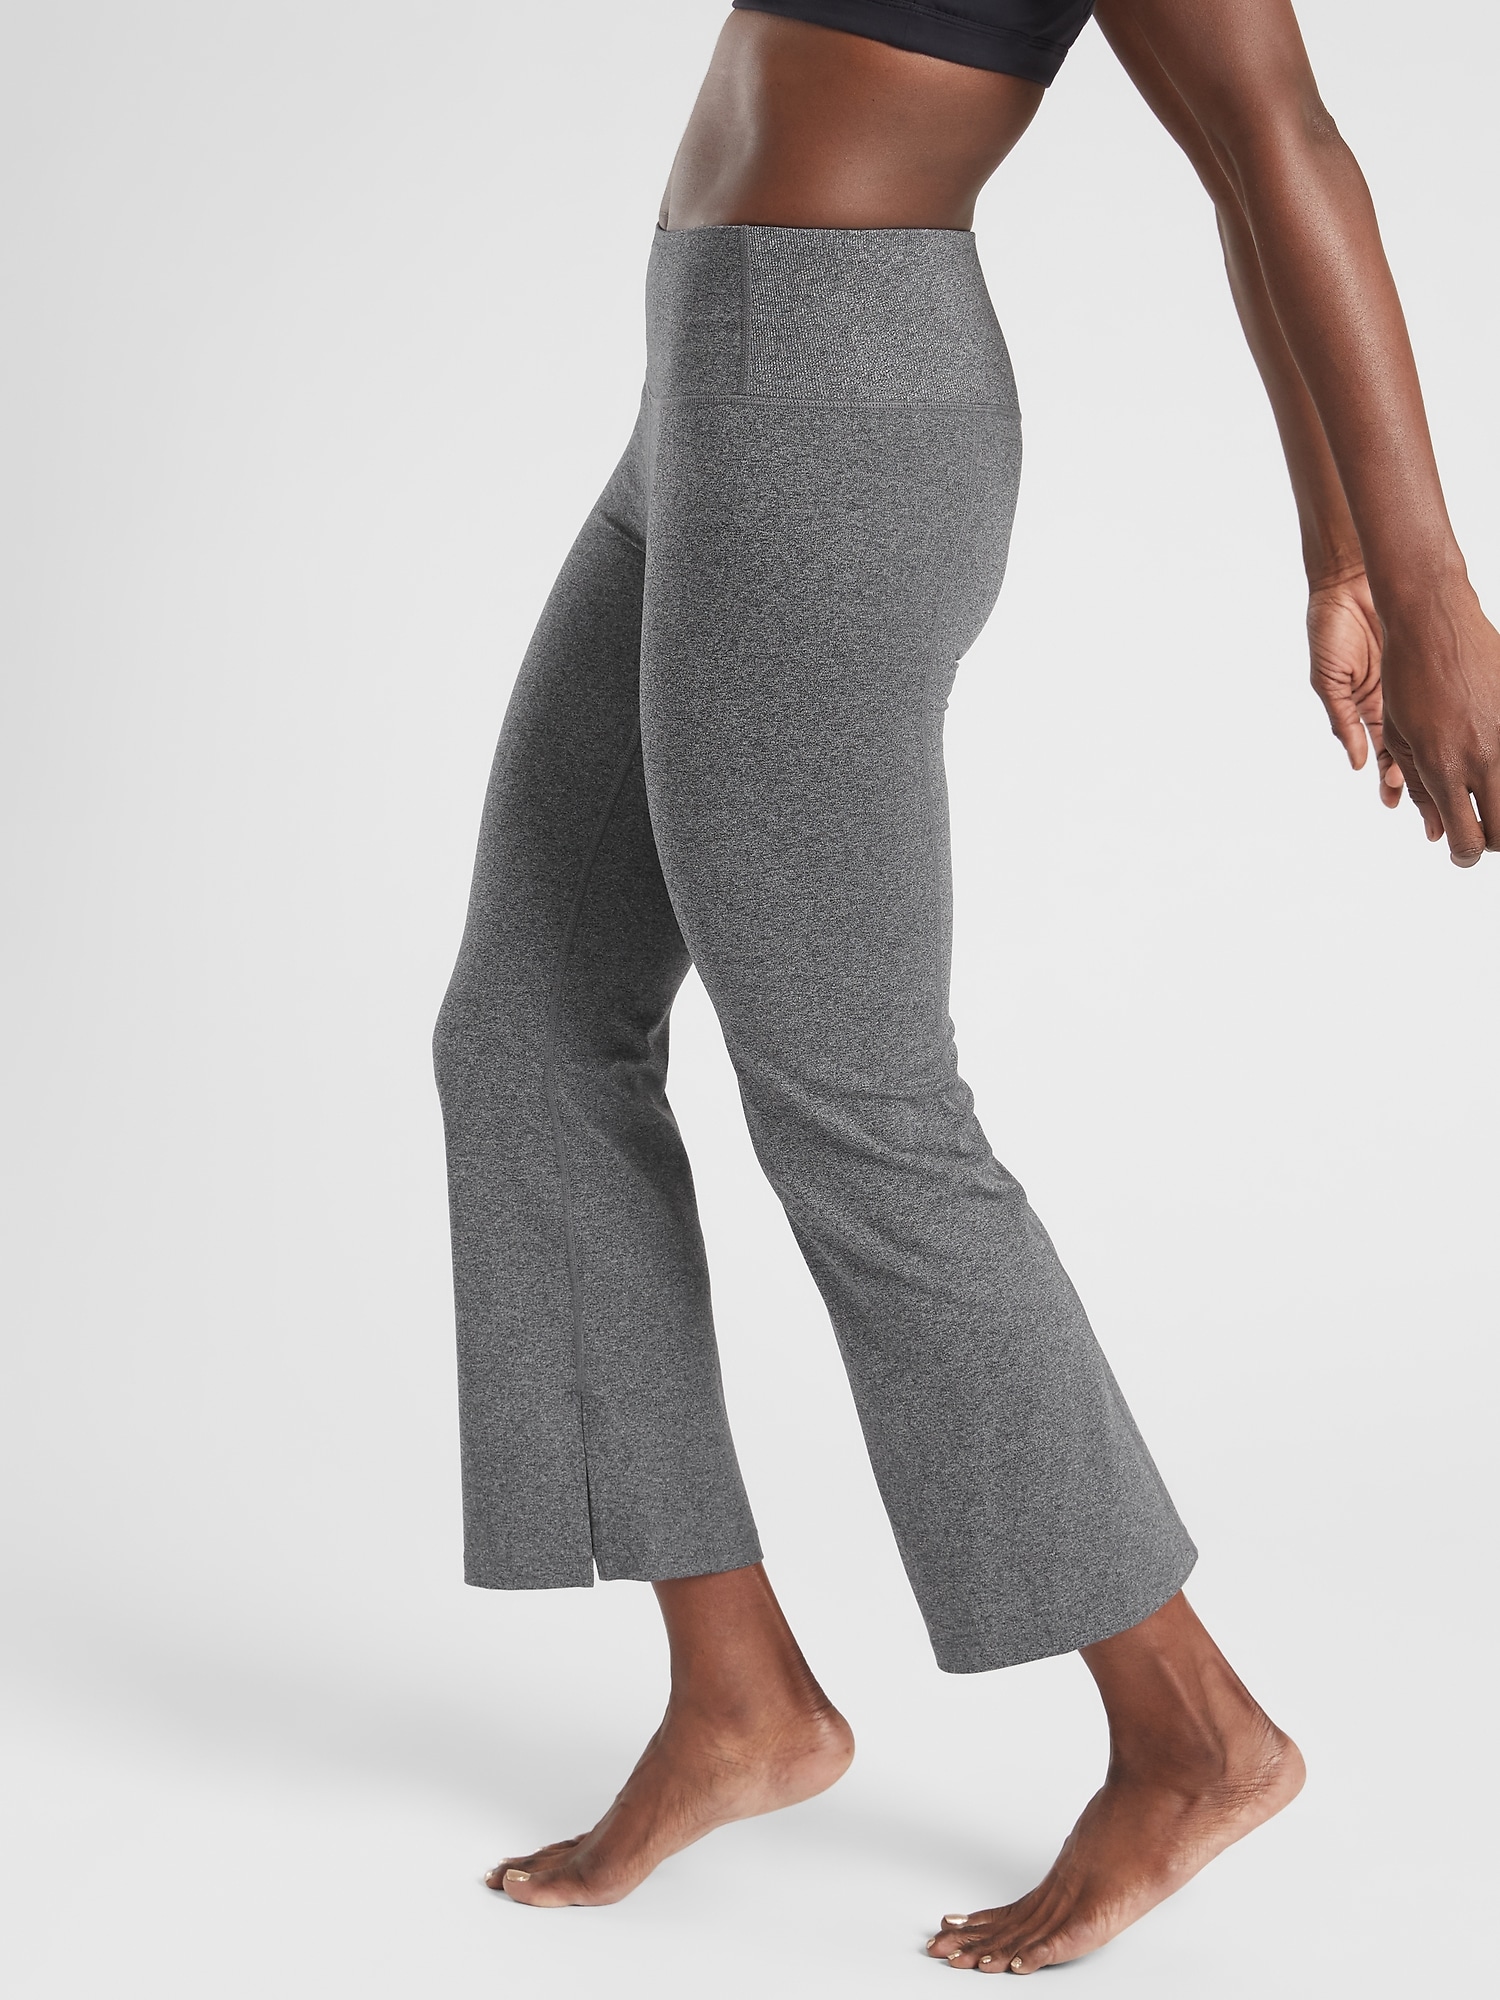 Athleta Barre Ribbed Tight In Powervita Size XS